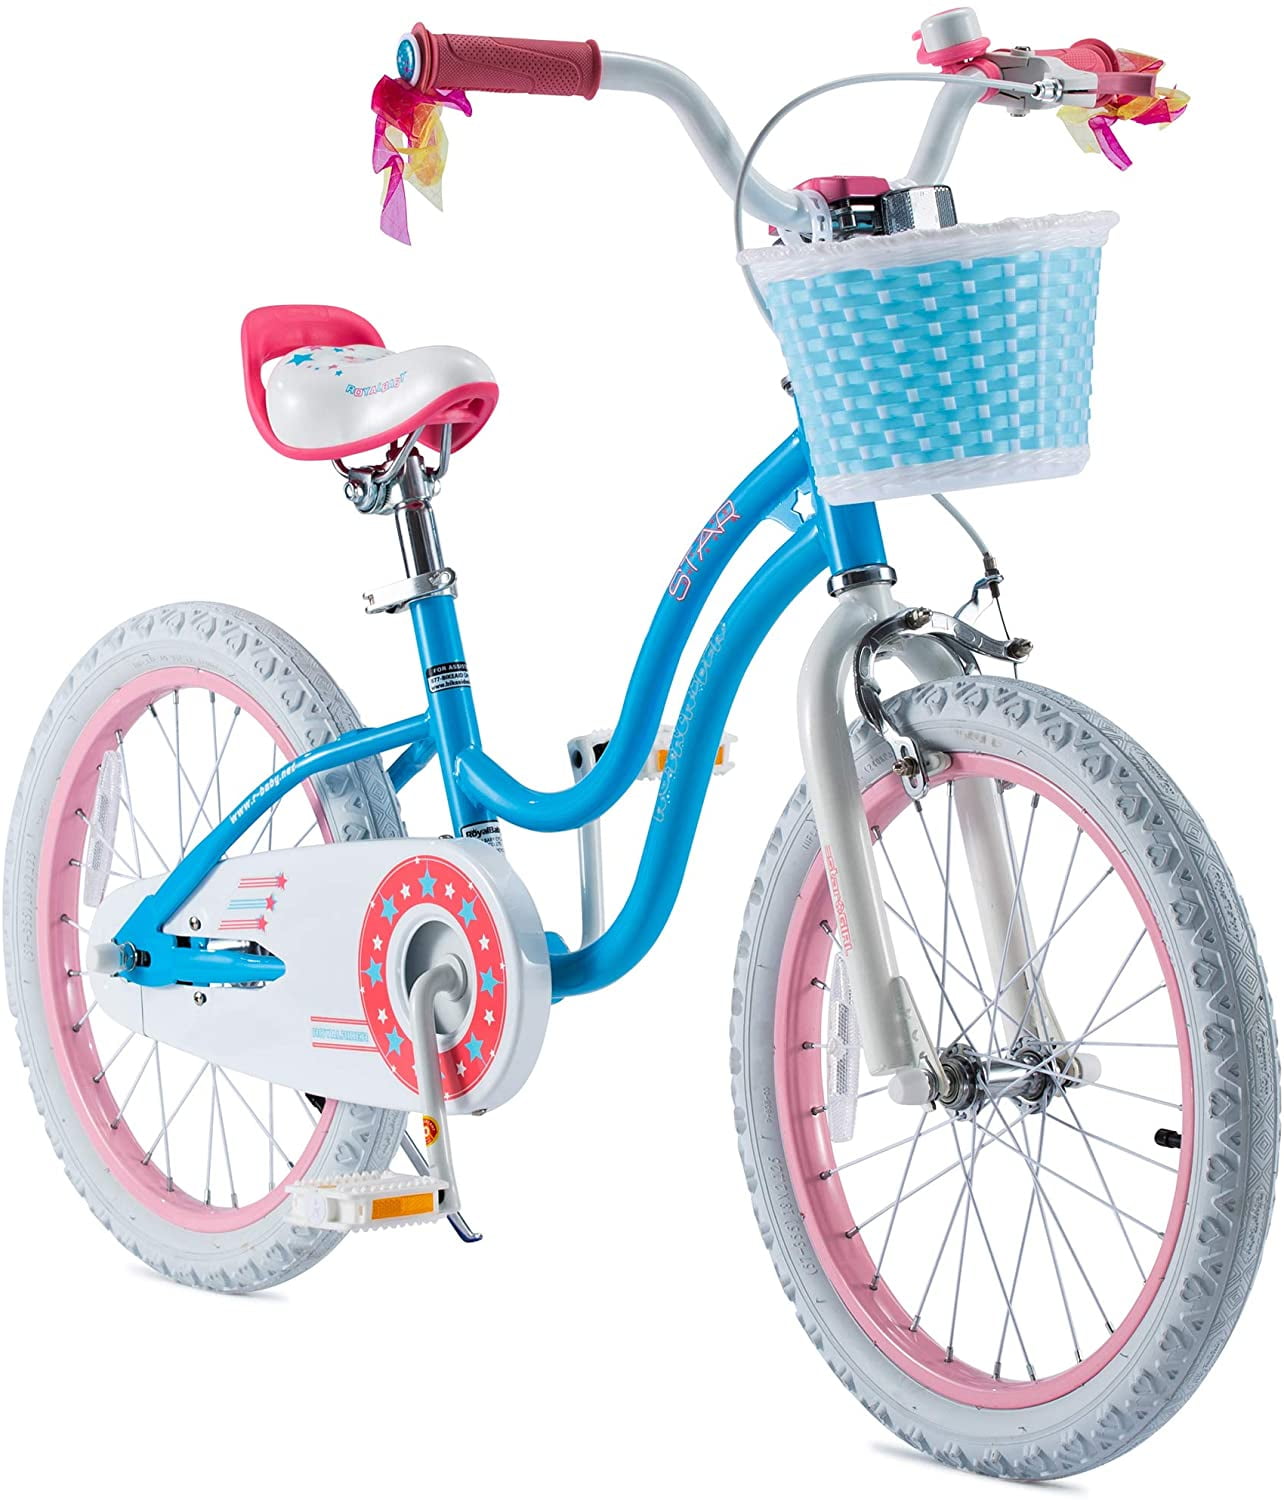 Children Child Kid Girls Boys Bike Front Bicycle Shopping Cycle Basket For Bikes 